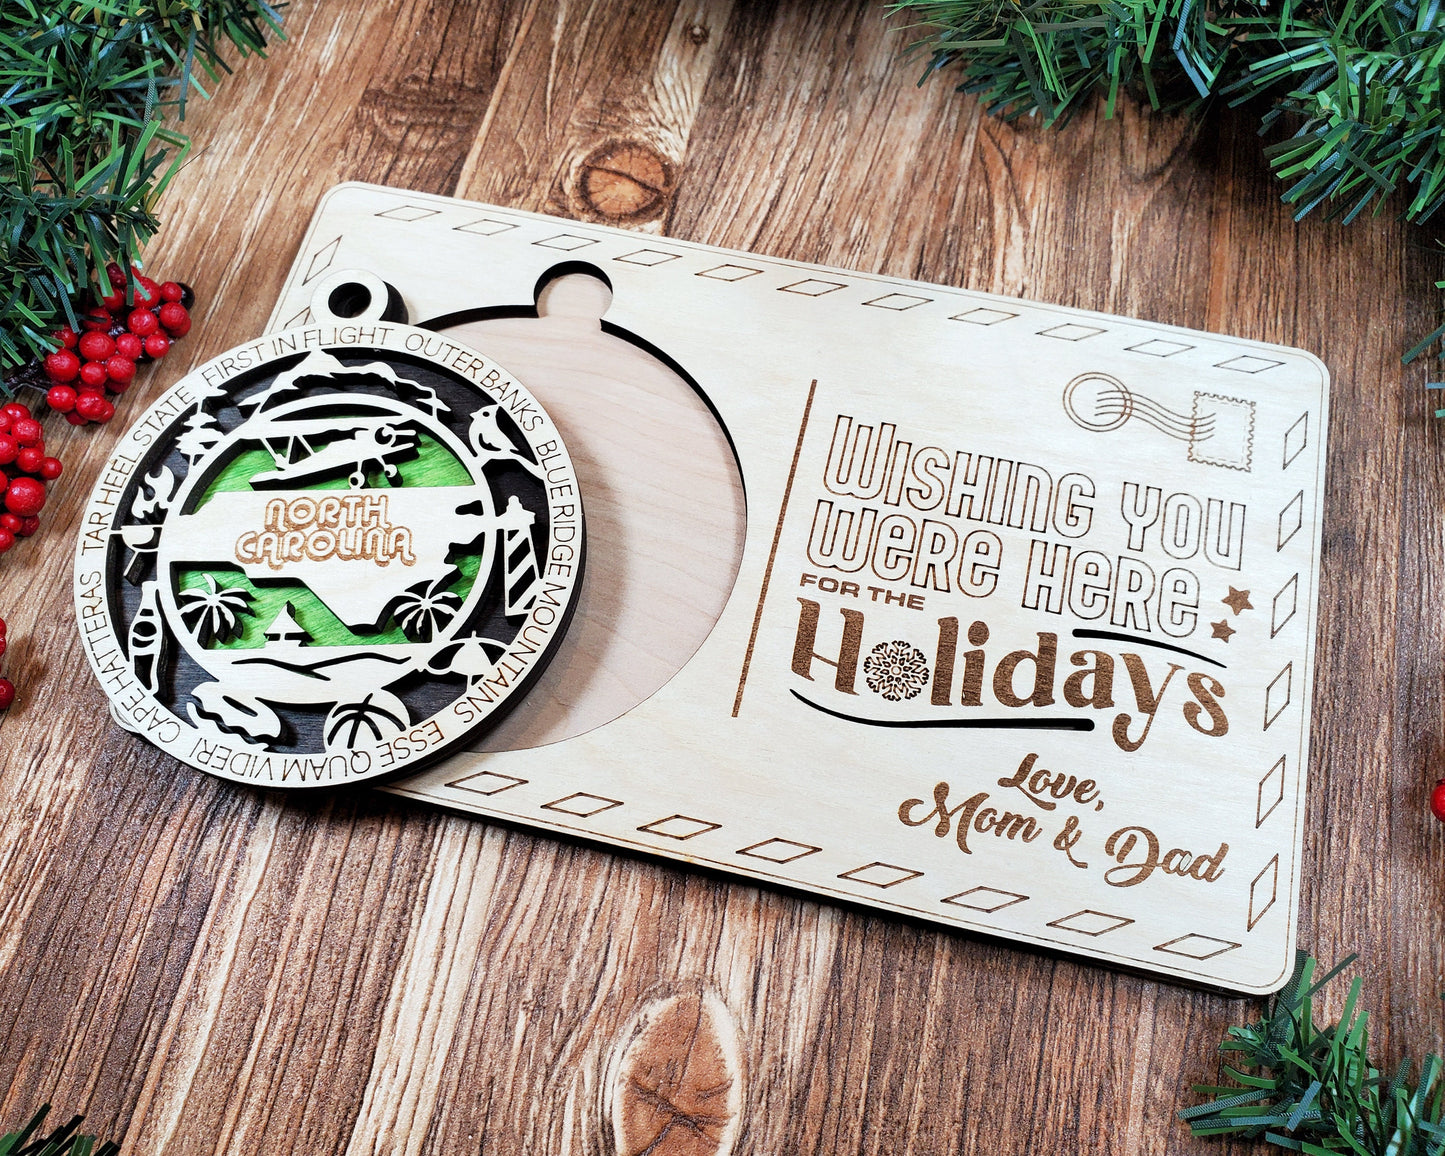 Ornament Postcards - 9 Design Templates - Ornaments sold Separately  - SVG File Download - Sized for Glowforge - Laser Ready Digital Files